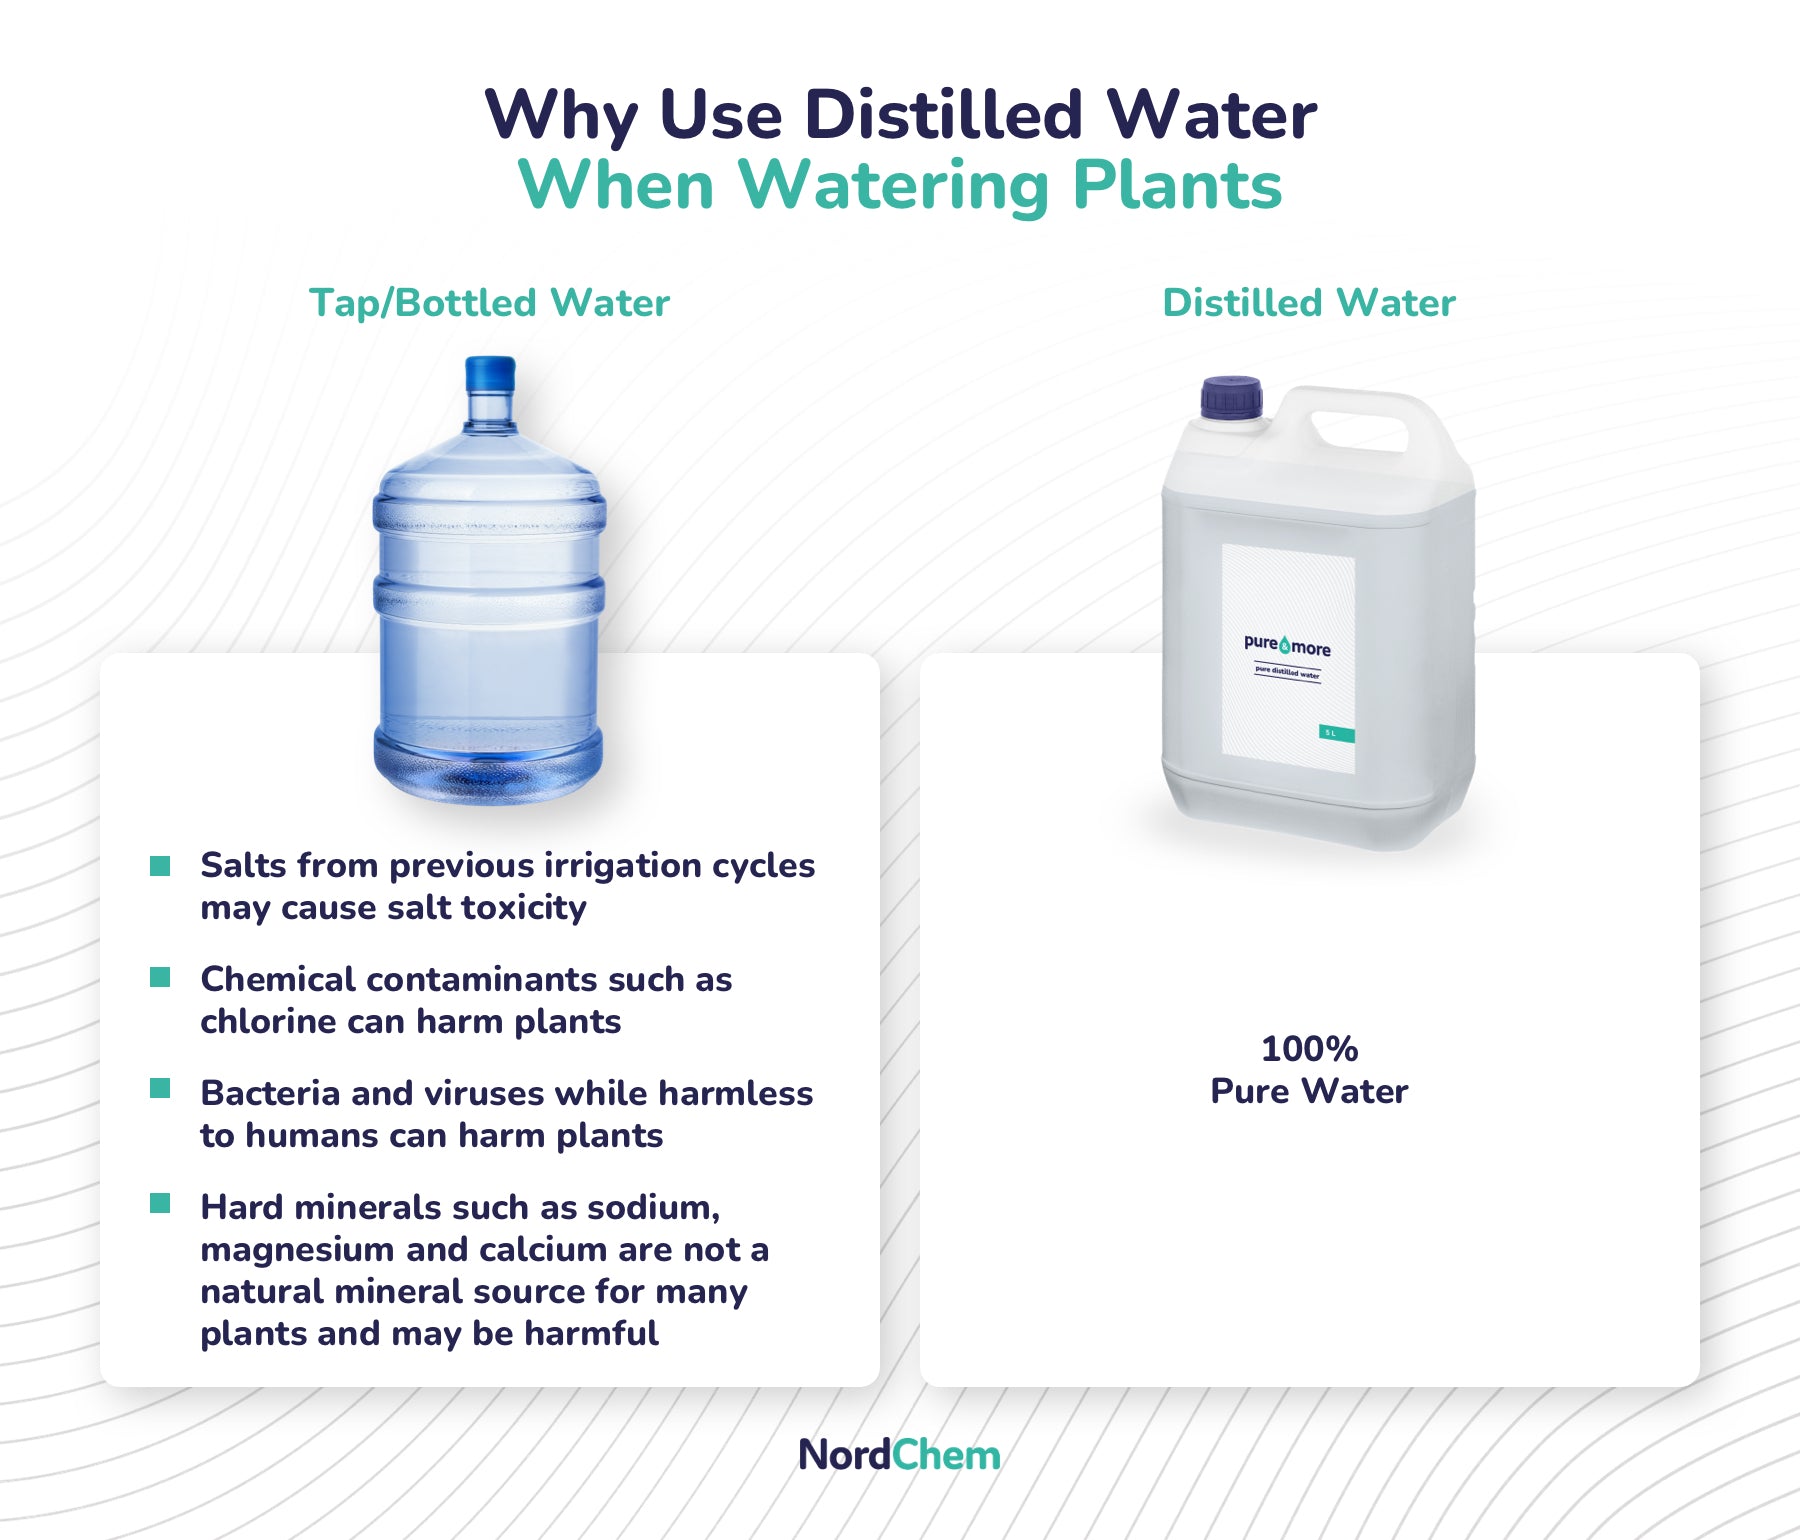 image showing the key reasons to use distilled water for watering plants